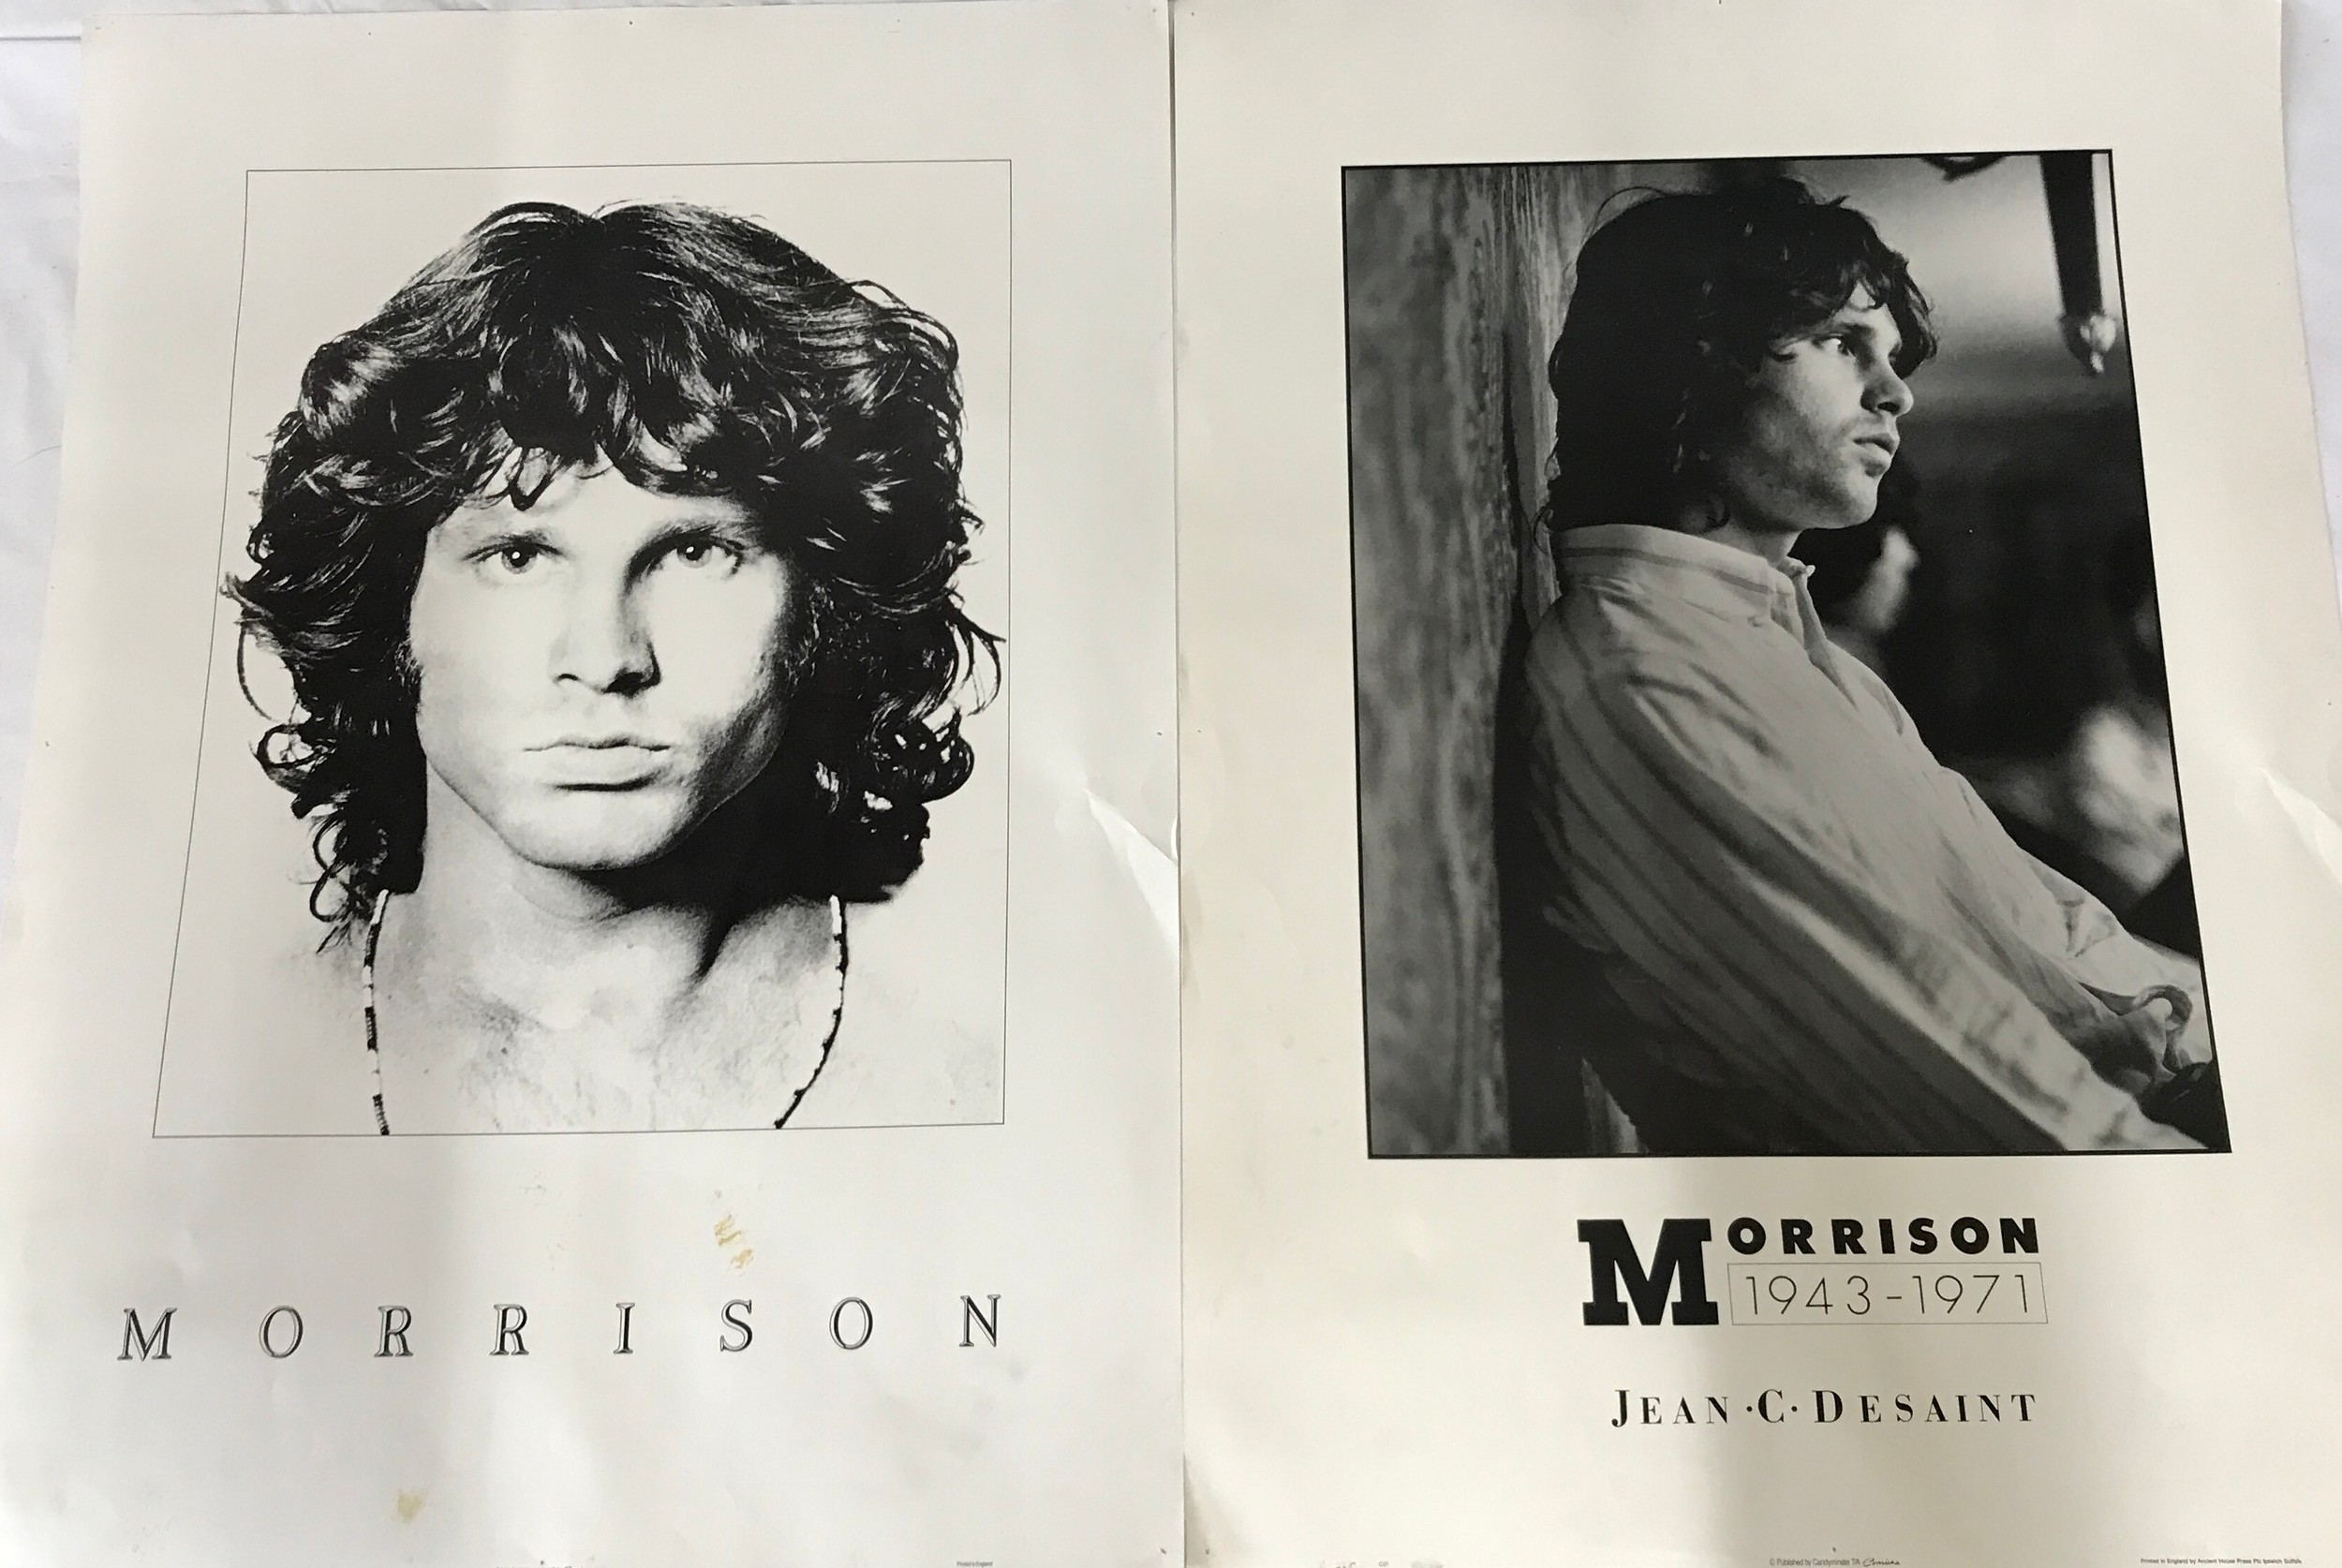 Two original Morrison posters printed by Candyminster T/A. 70 x 50 cm.